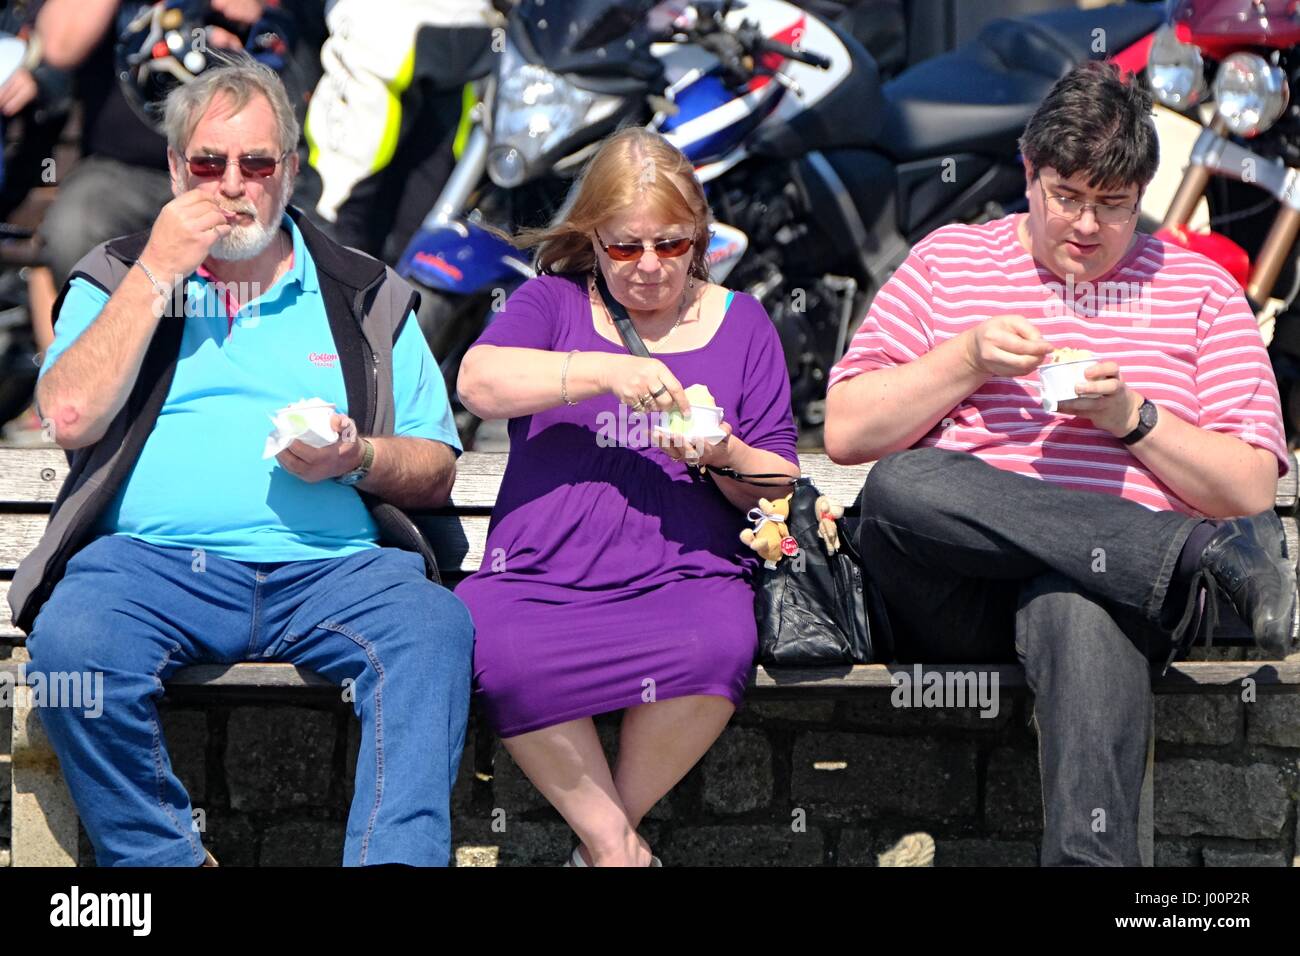 West Bay, Dorset, UK. 8th Apr, 2017. These three visitors cool off with an ice cream as crowds flock to West Bay in Dorset to enjoy what looks like the warmest day of the year. Credit: Tom Corban/Alamy Live News Stock Photo